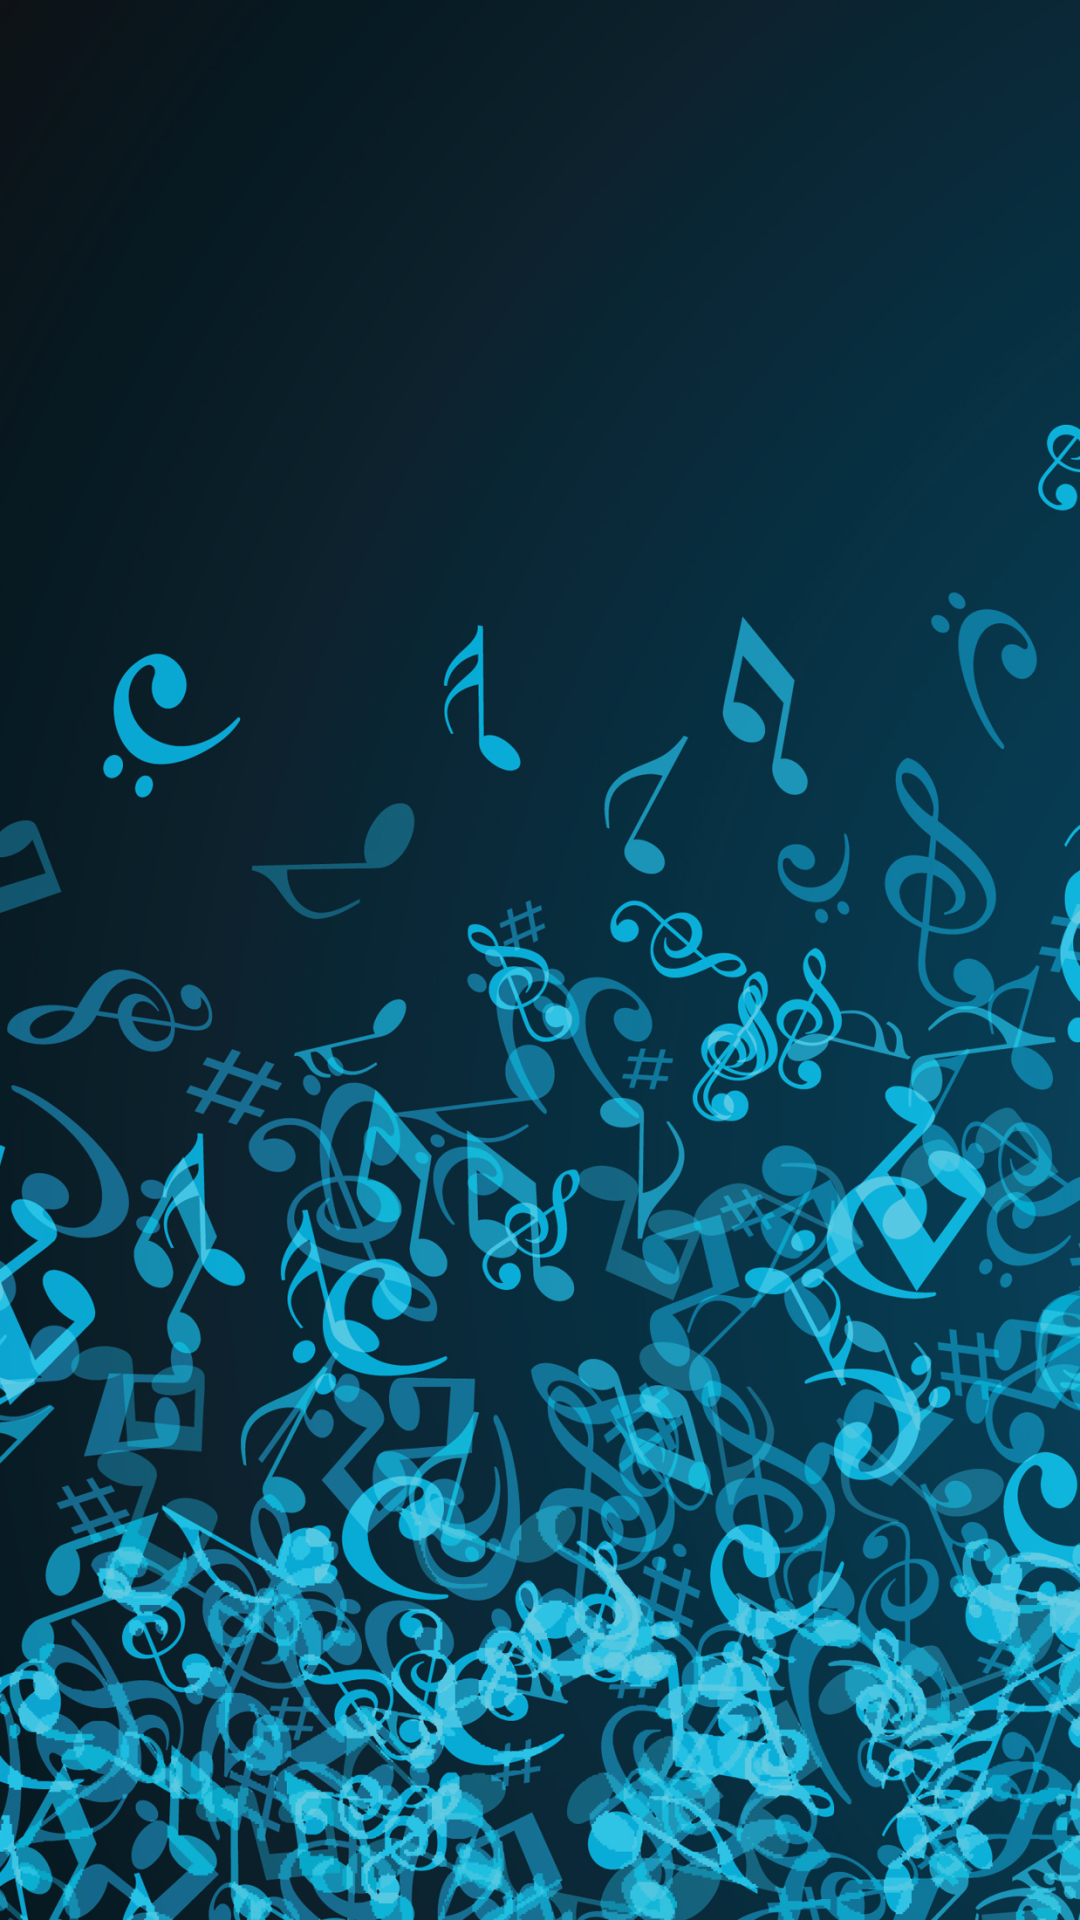 music, musical notes